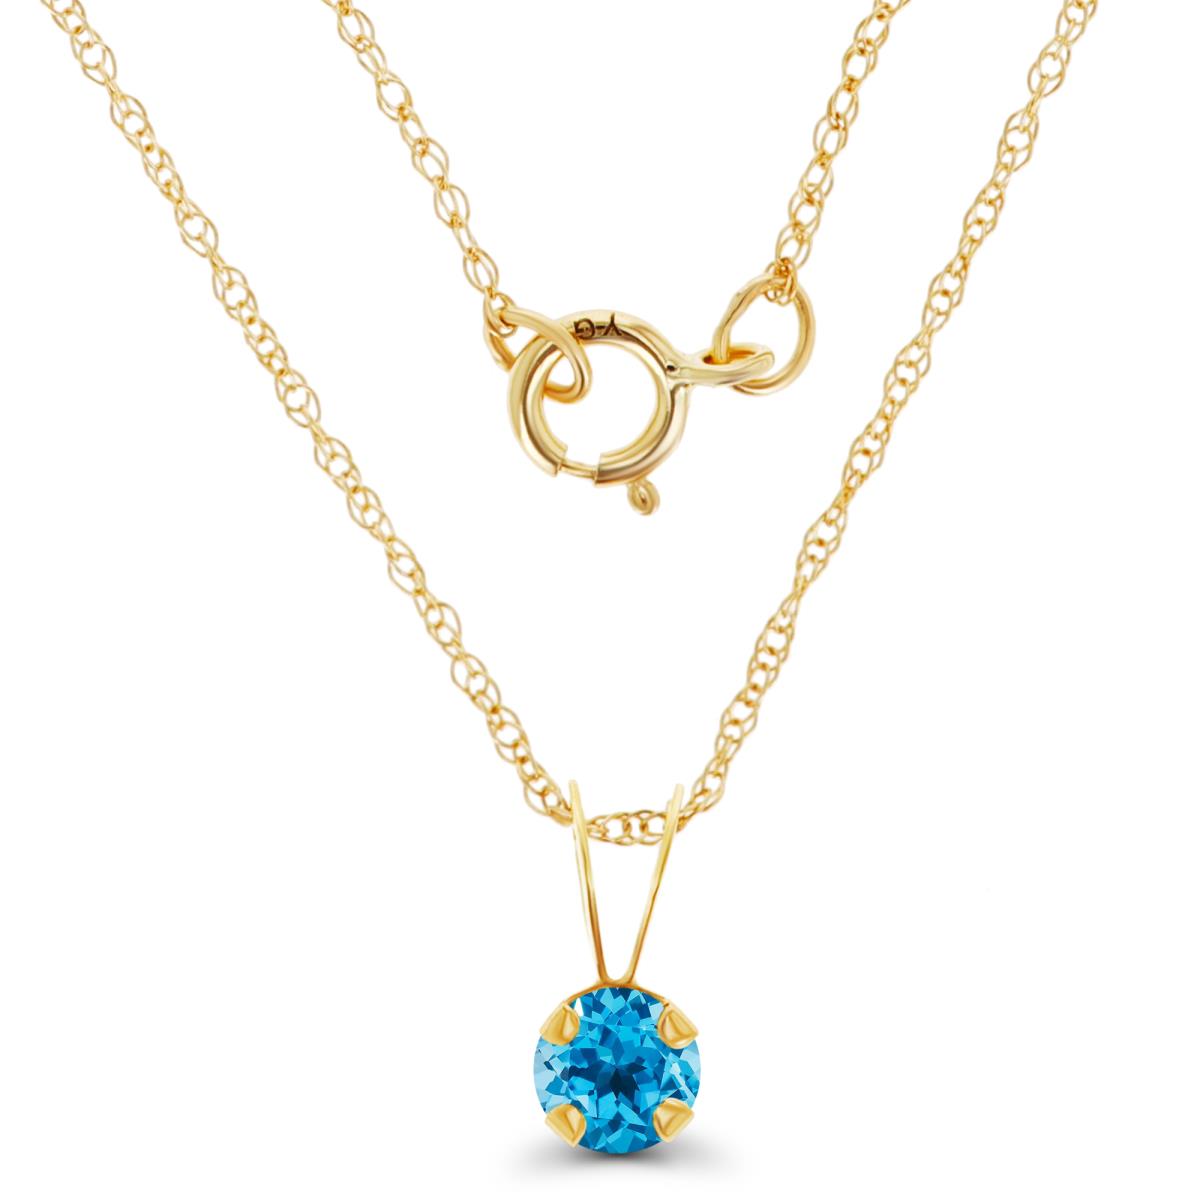 14K Yellow Gold 4mm Round Swiss Blue Topaz 18" Rope Chain Necklace